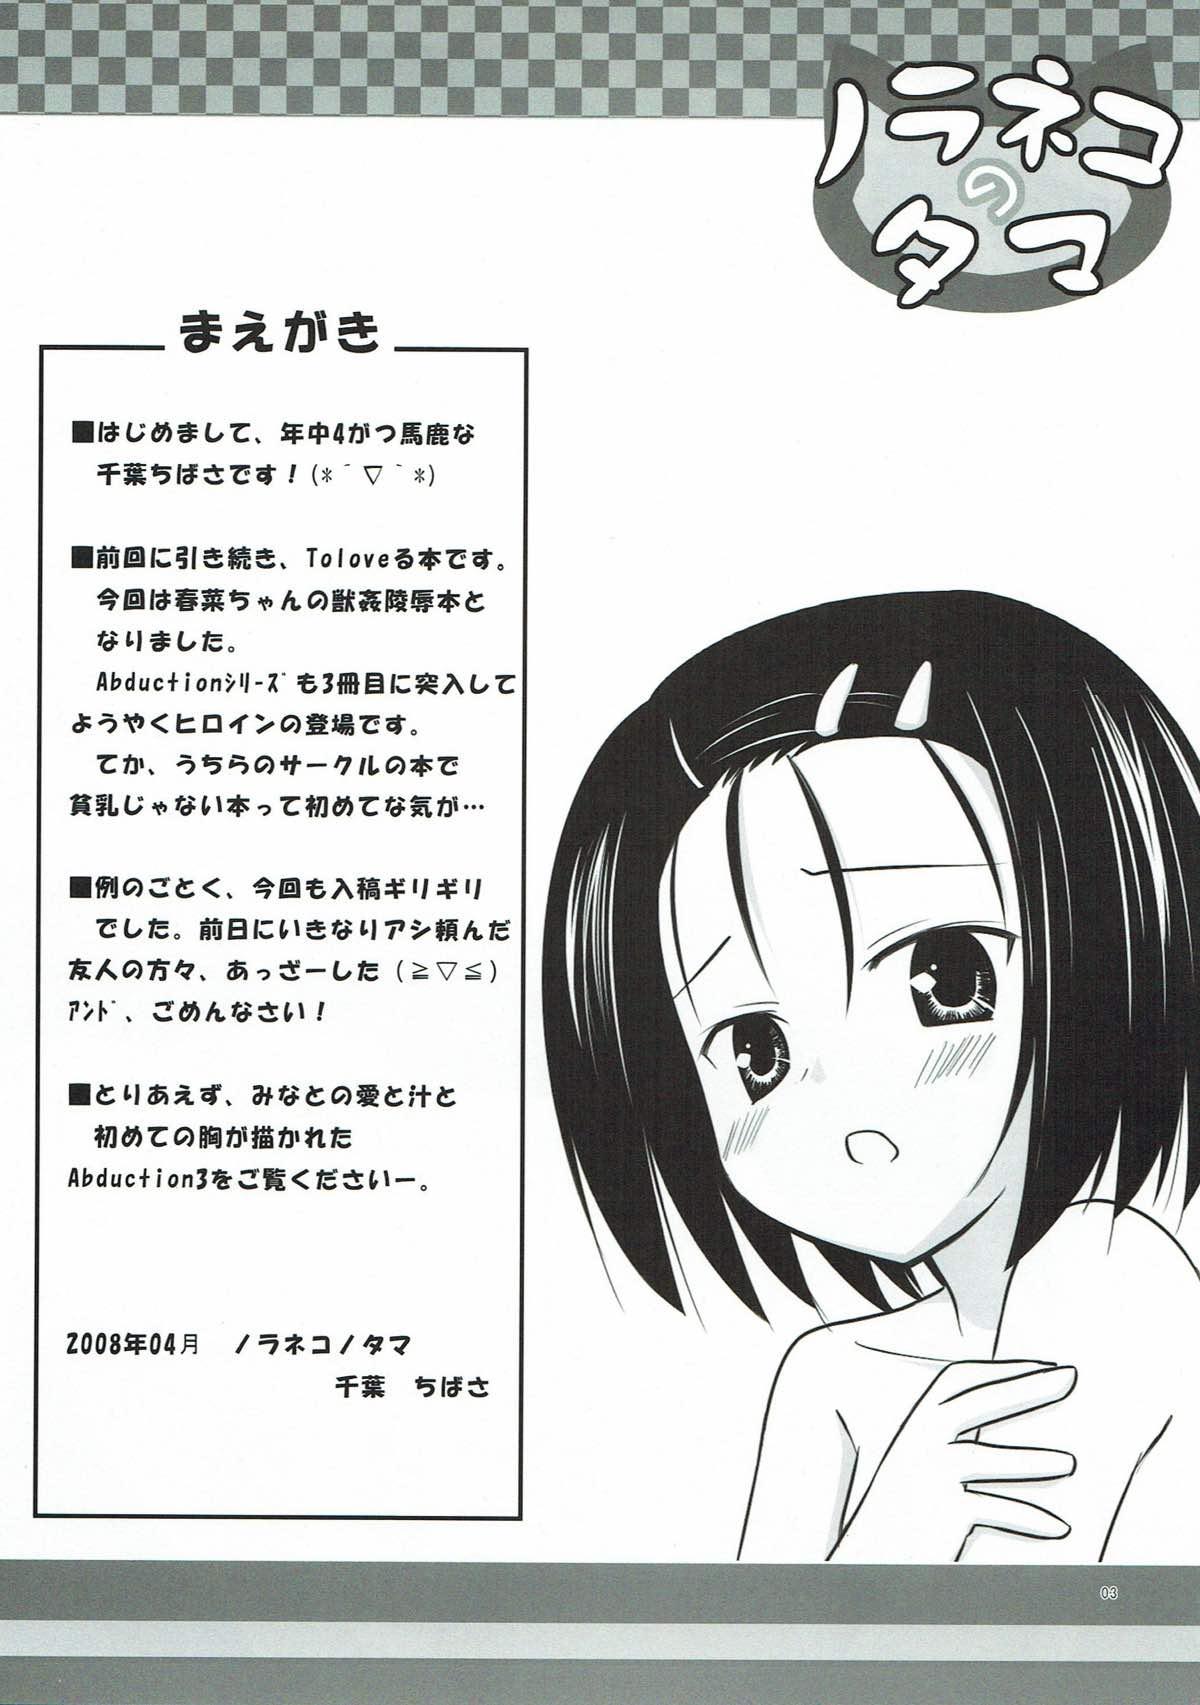 Party Abduction 3 - To love-ru Grandmother - Page 2